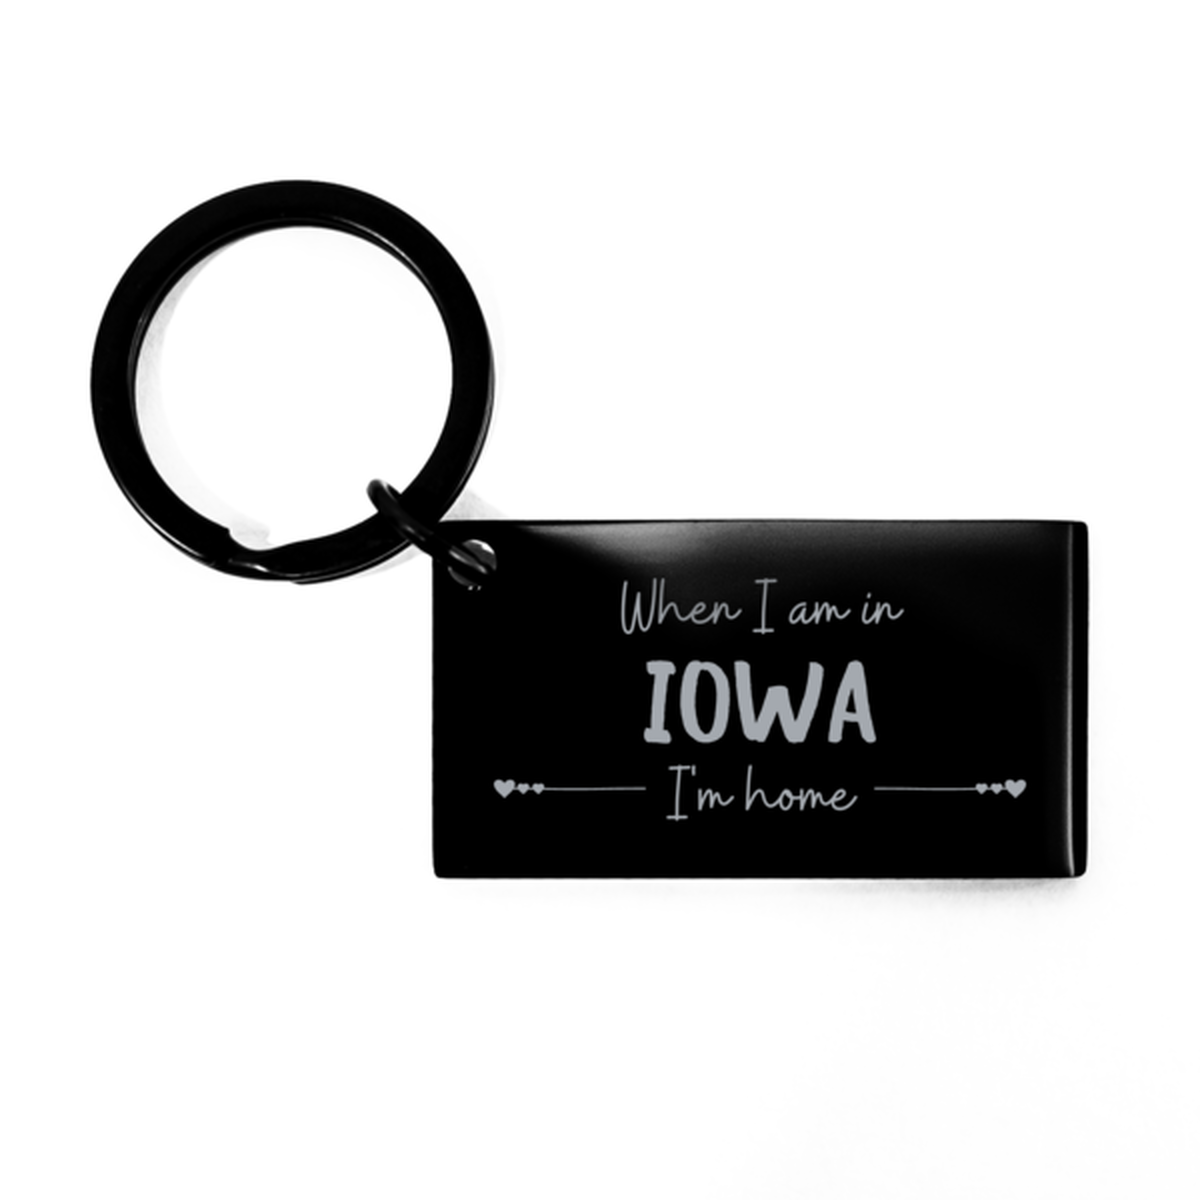 When I am in Iowa I'm home Keychain, Cheap Gifts For Iowa, State Iowa Birthday Gifts for Friends Coworker